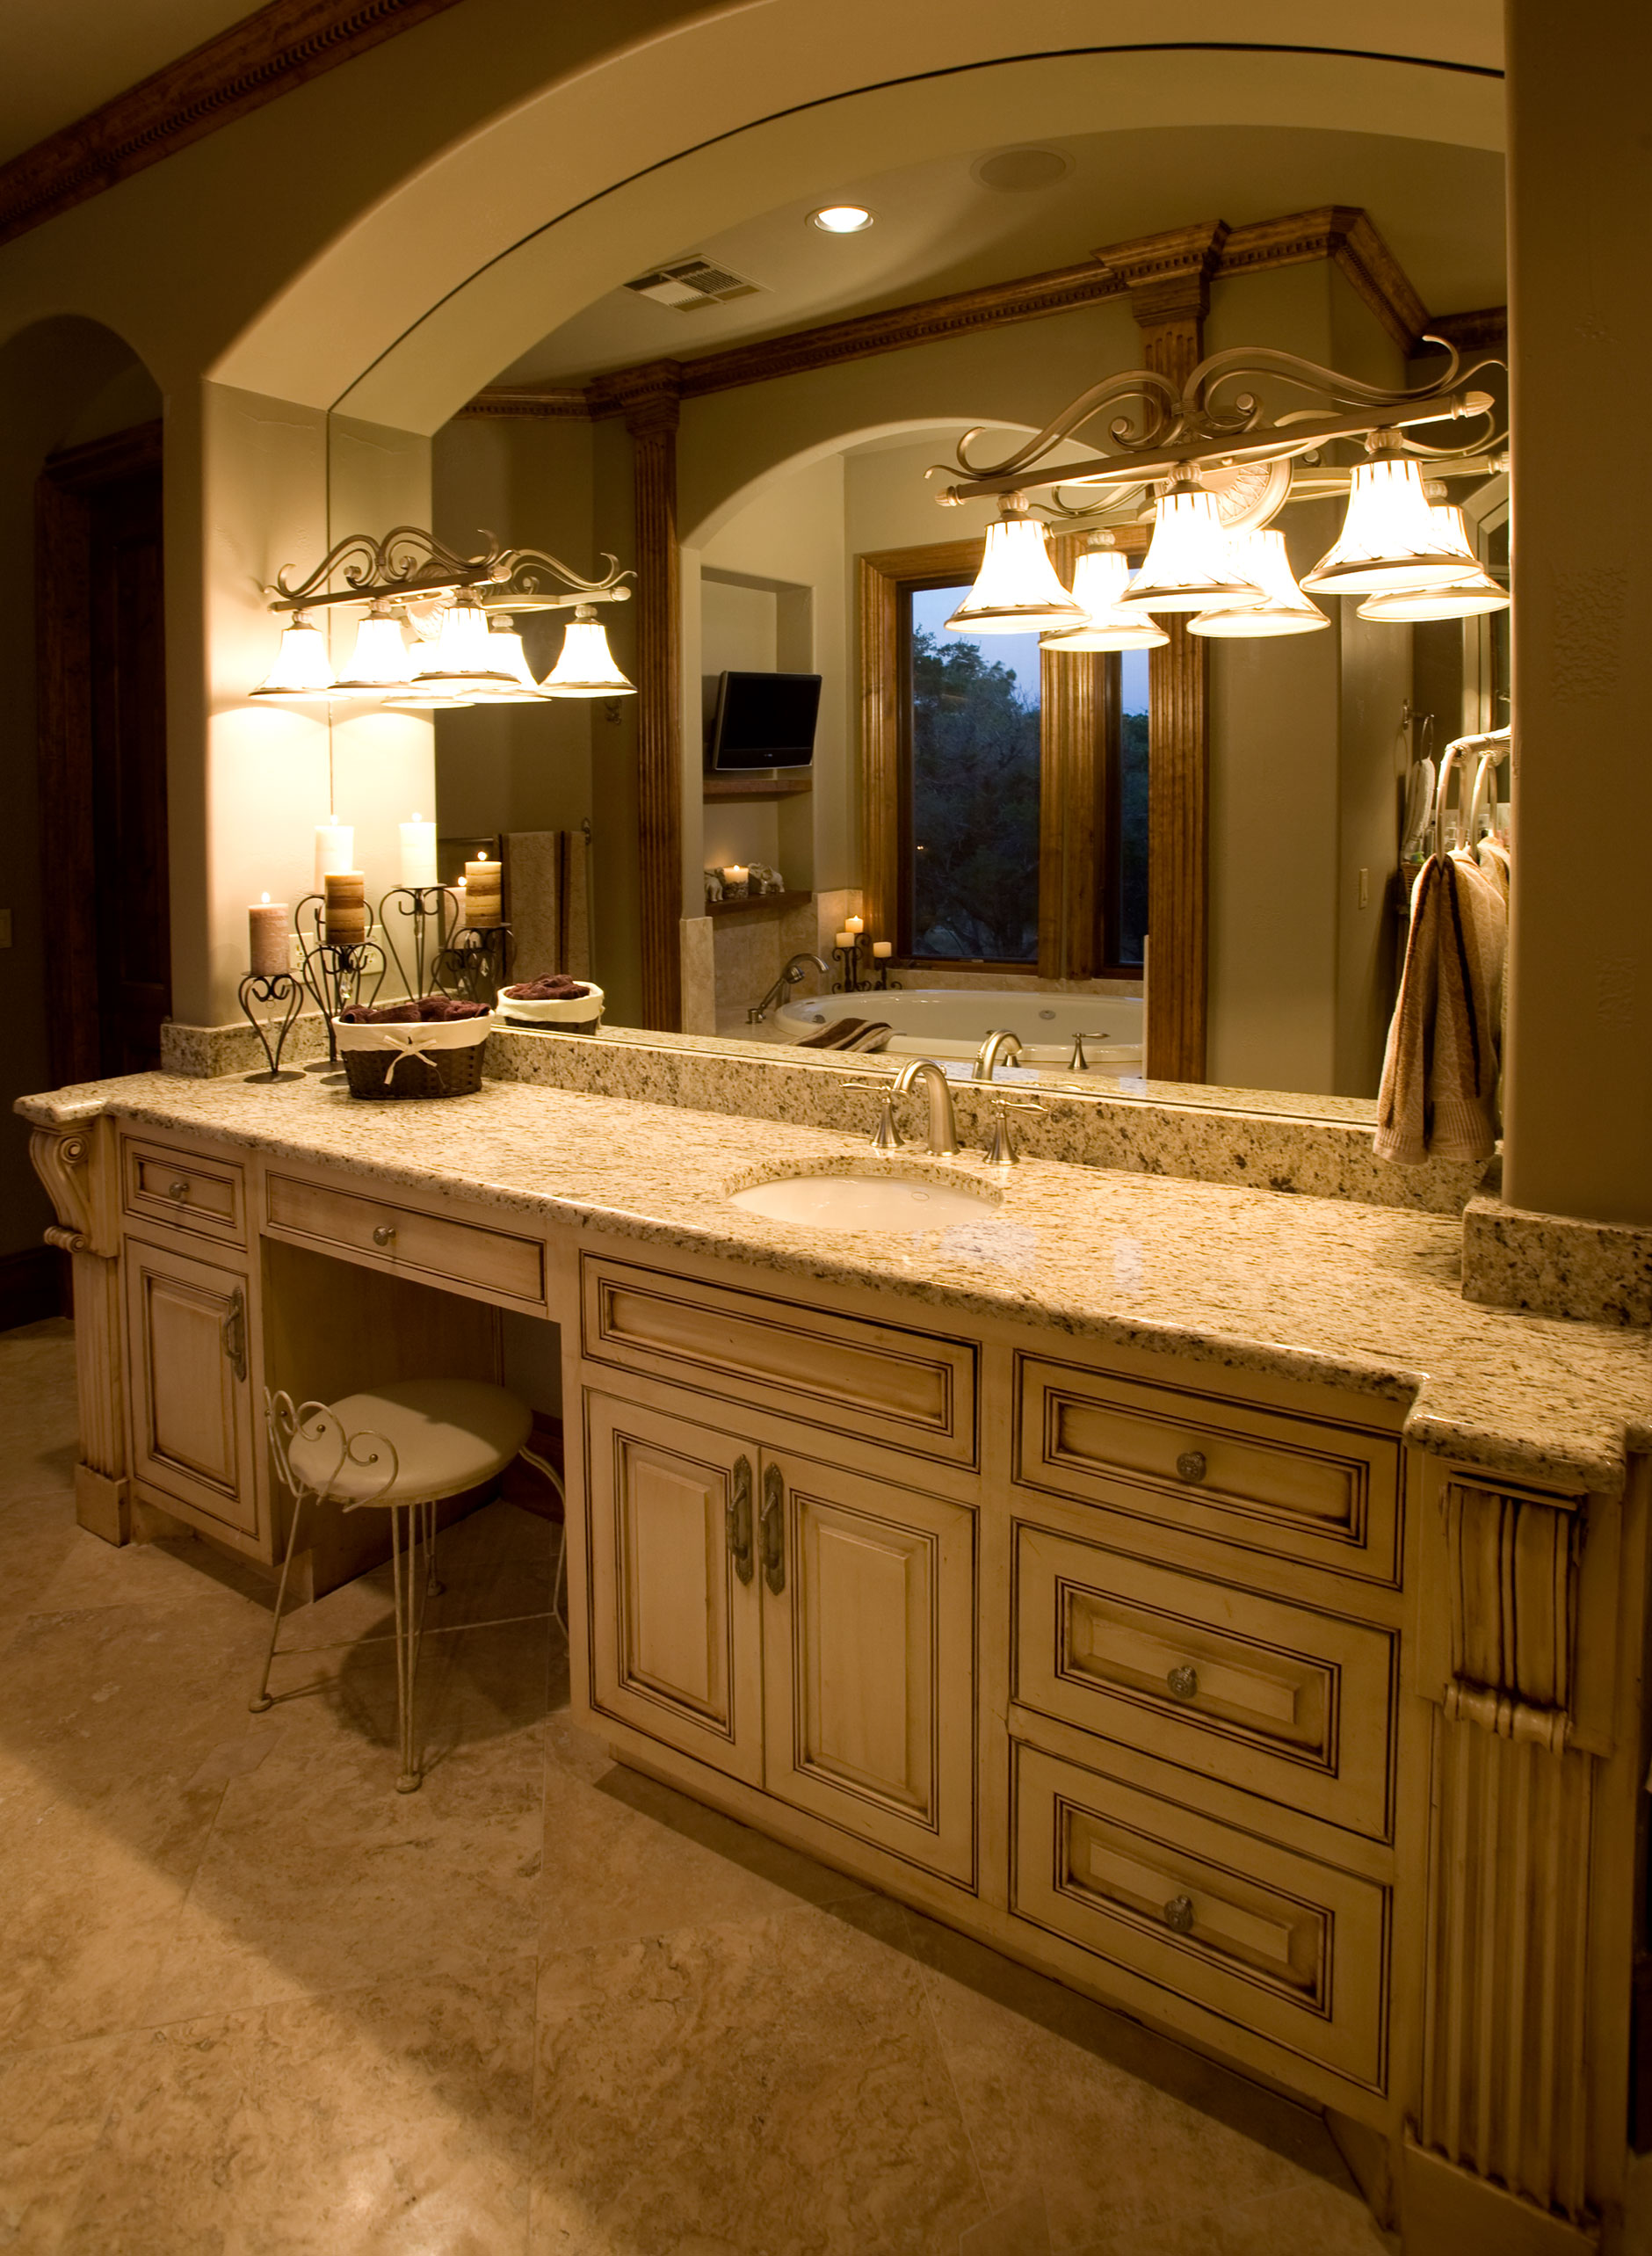 Bathroom cabinet 5 shown with M101, M4, RP1 cabinet doors